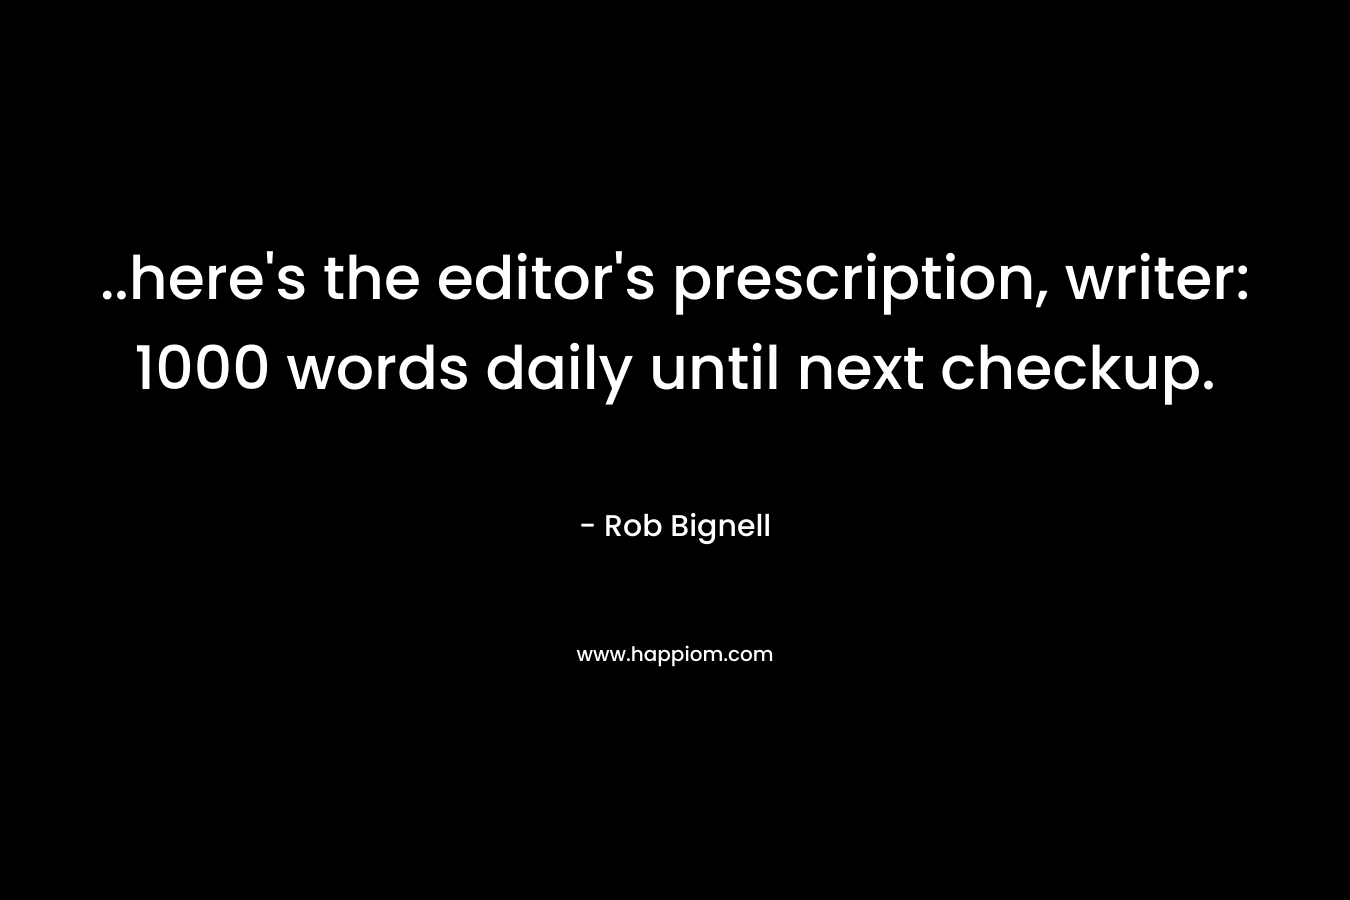 ..here's the editor's prescription, writer: 1000 words daily until next checkup.